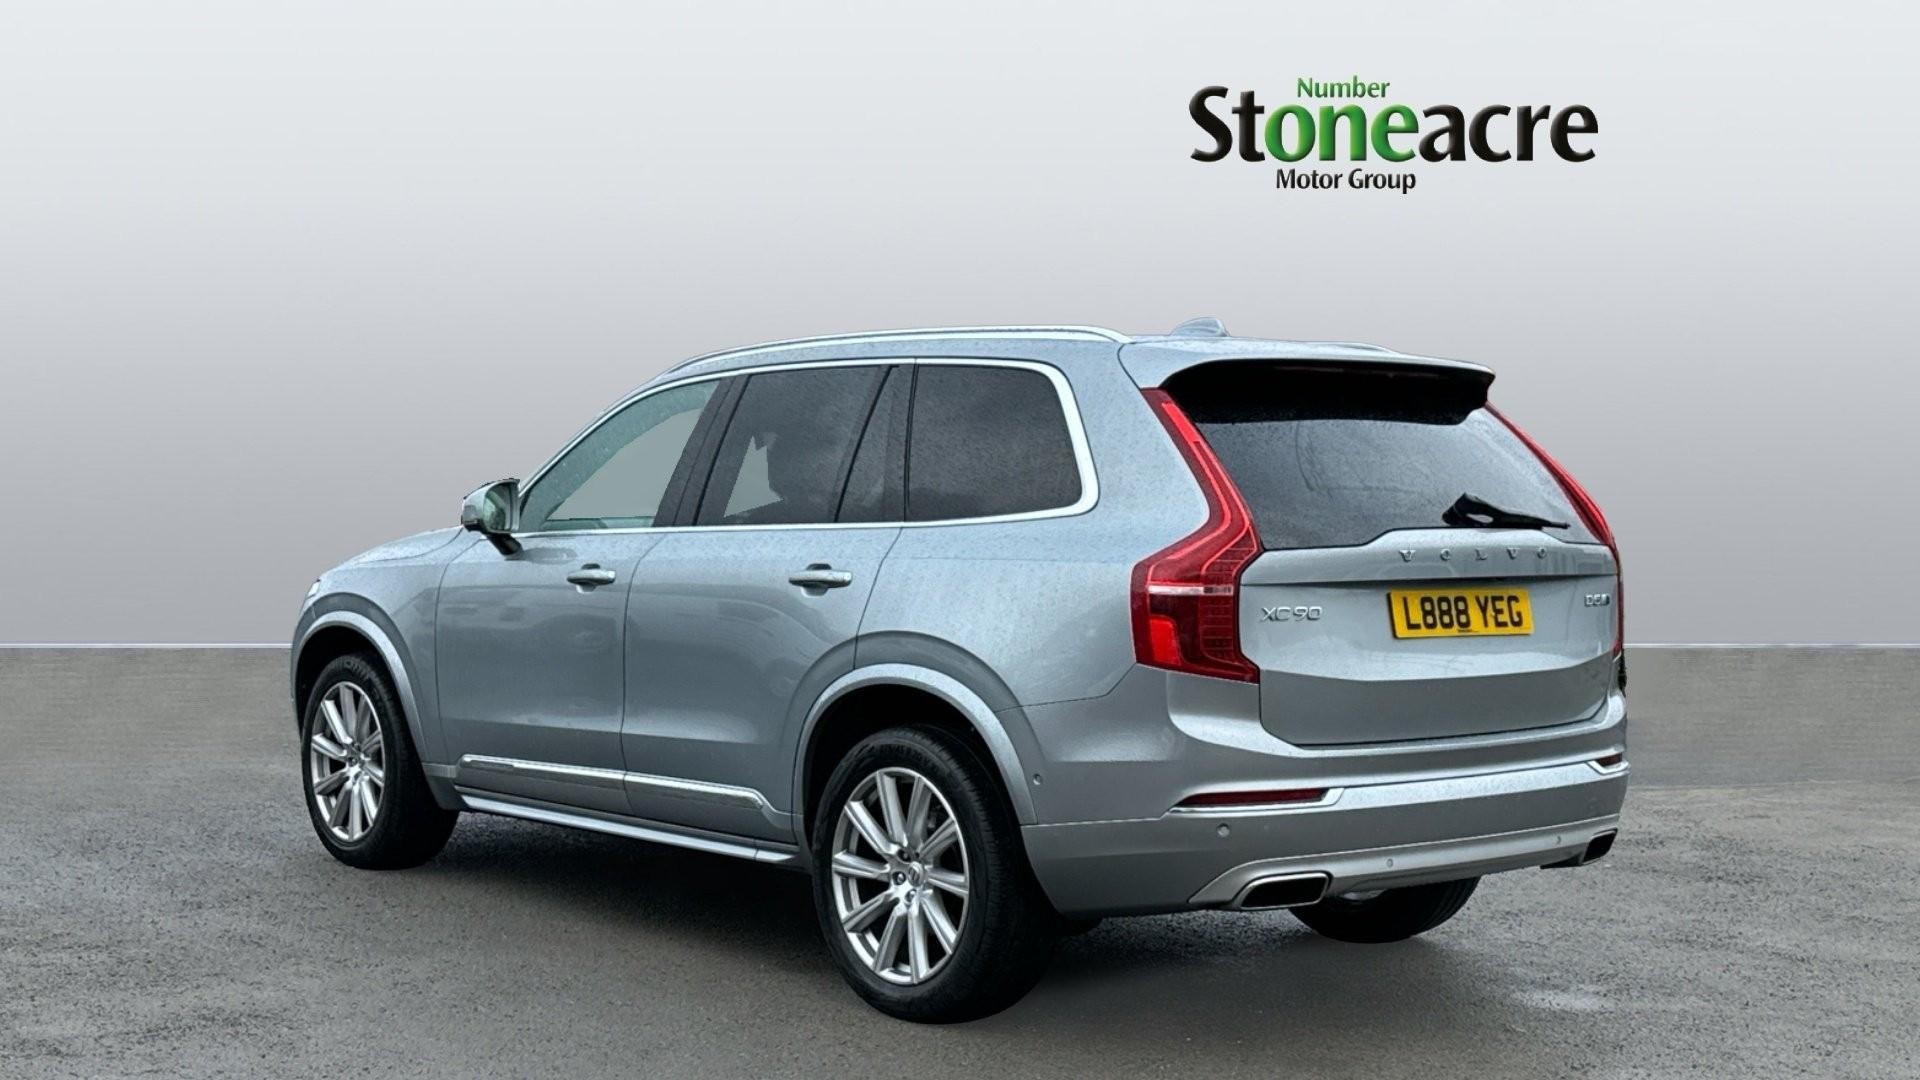 Volvo XC90 2.0 D5 Inscription 5dr AWD Geartronic (L888YEG) image 1